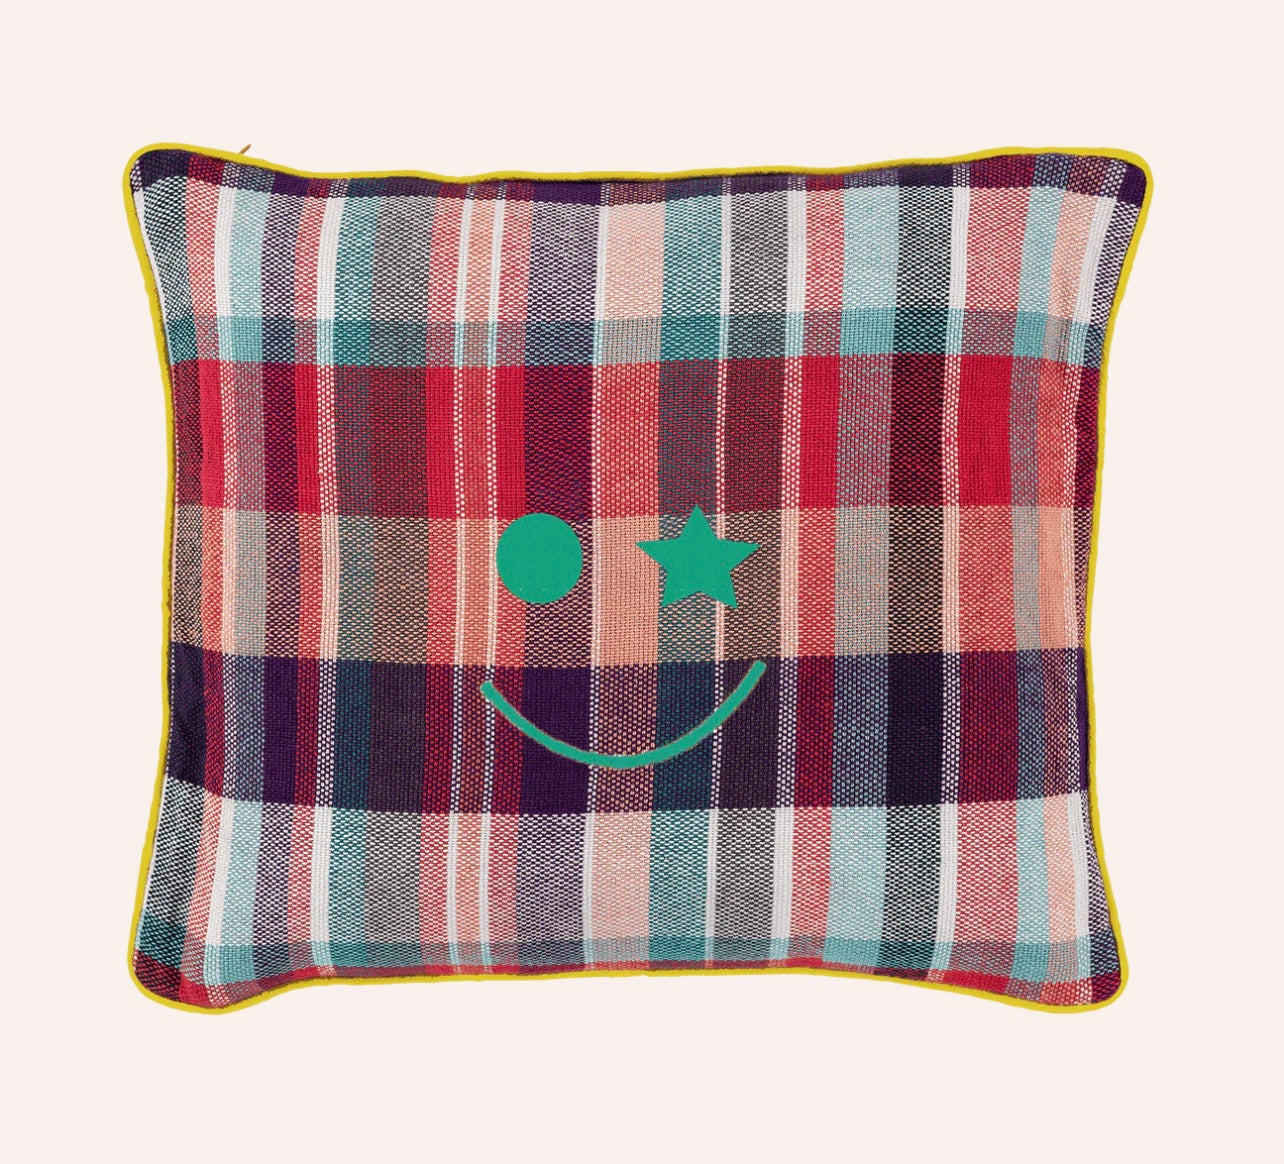 Embroidered happy smile plaid cushion